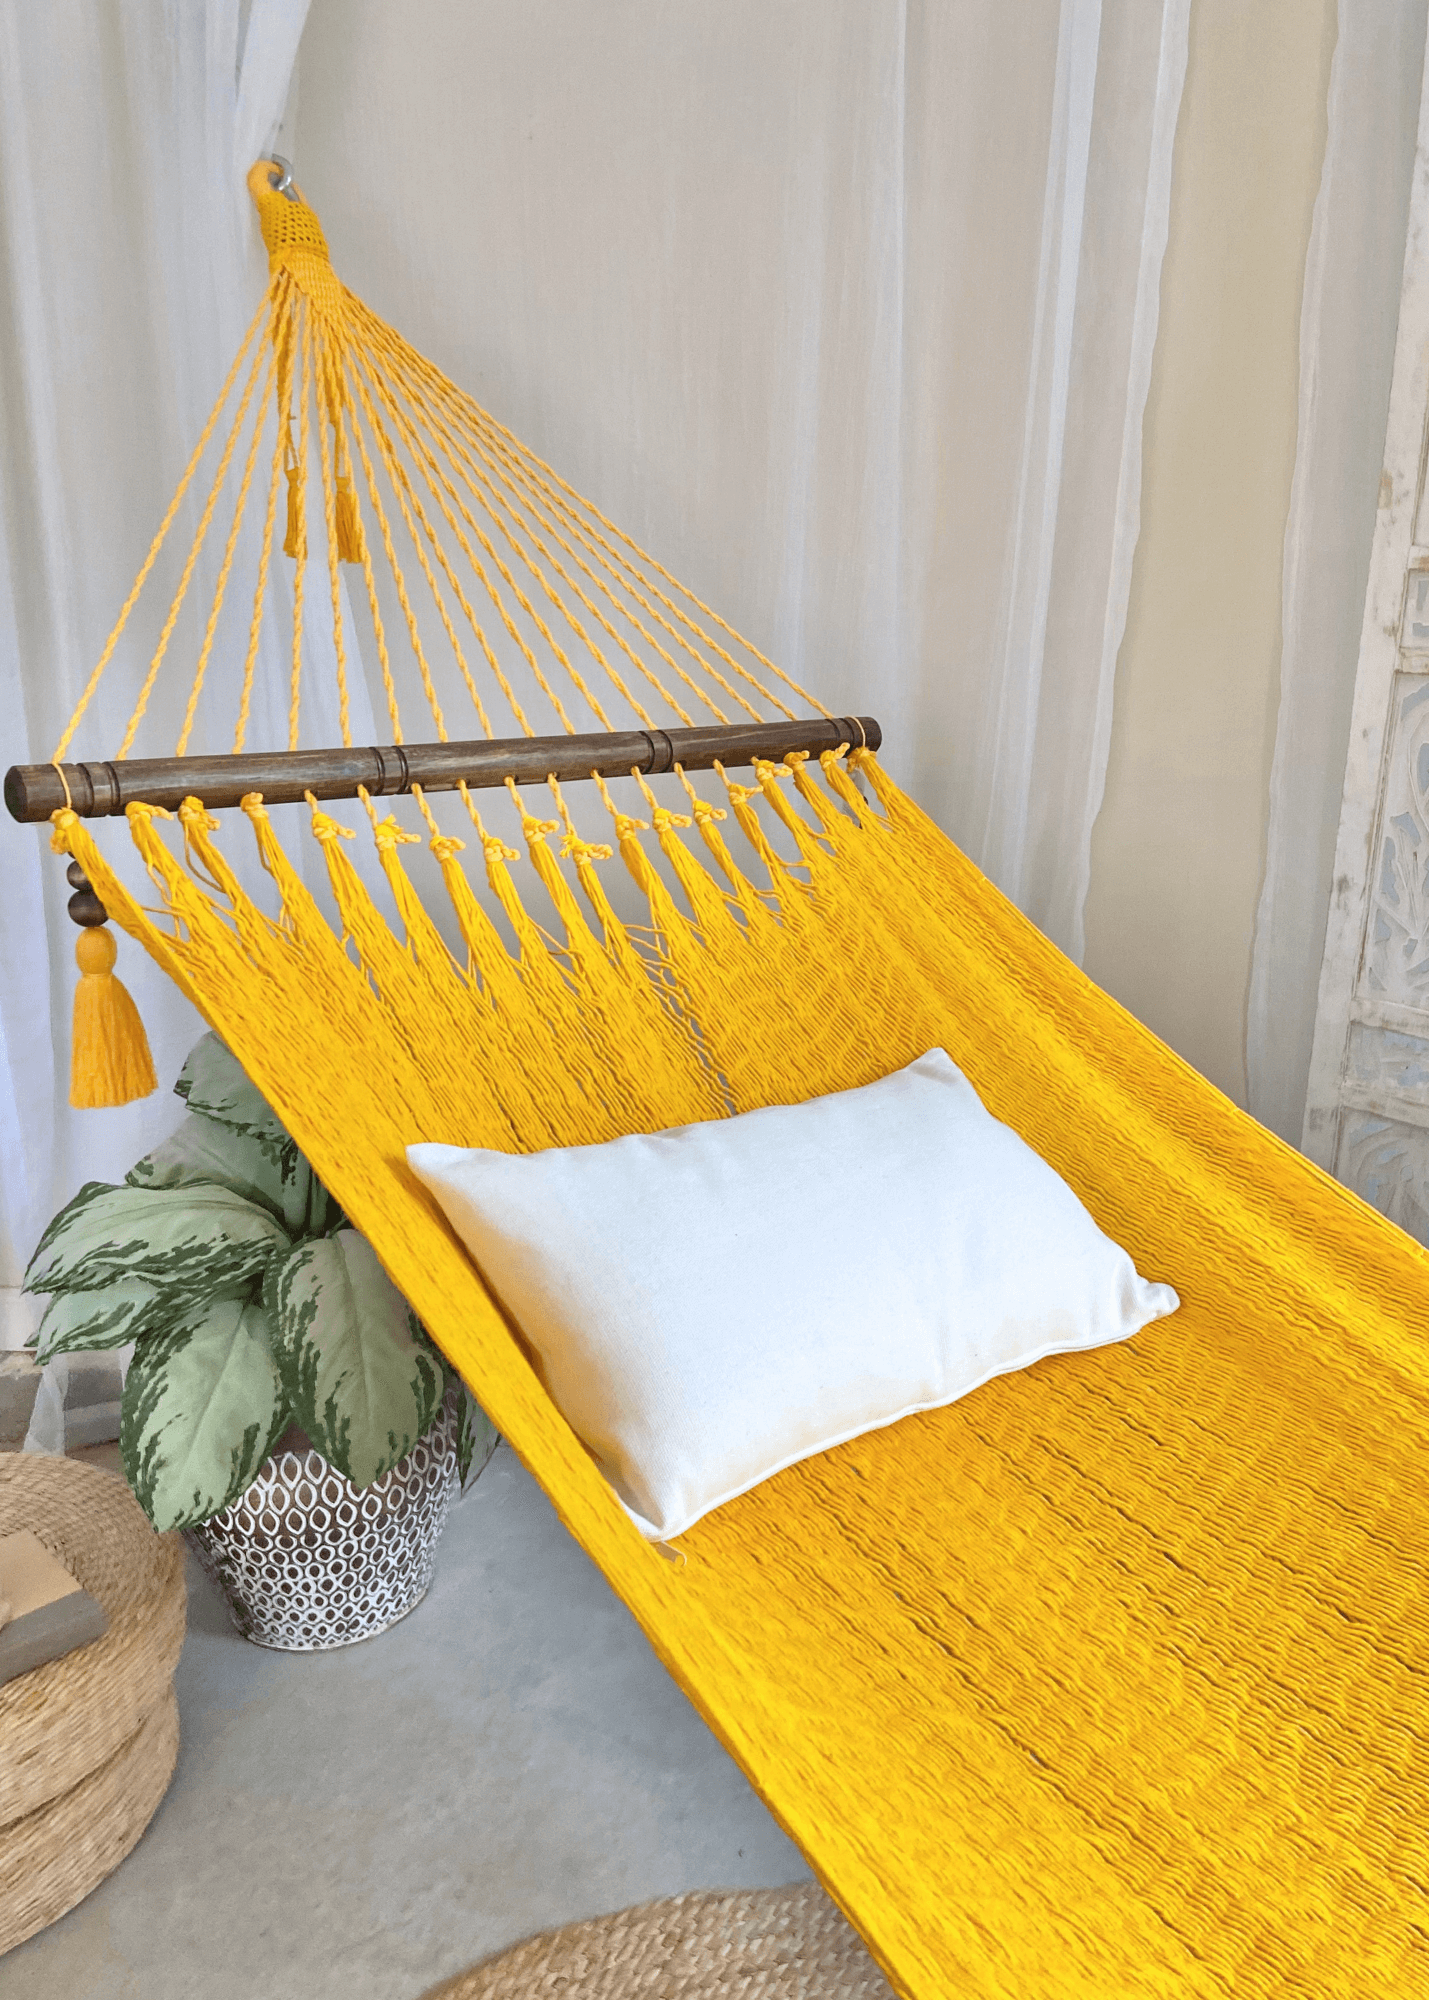 yellow hammock with white pillow